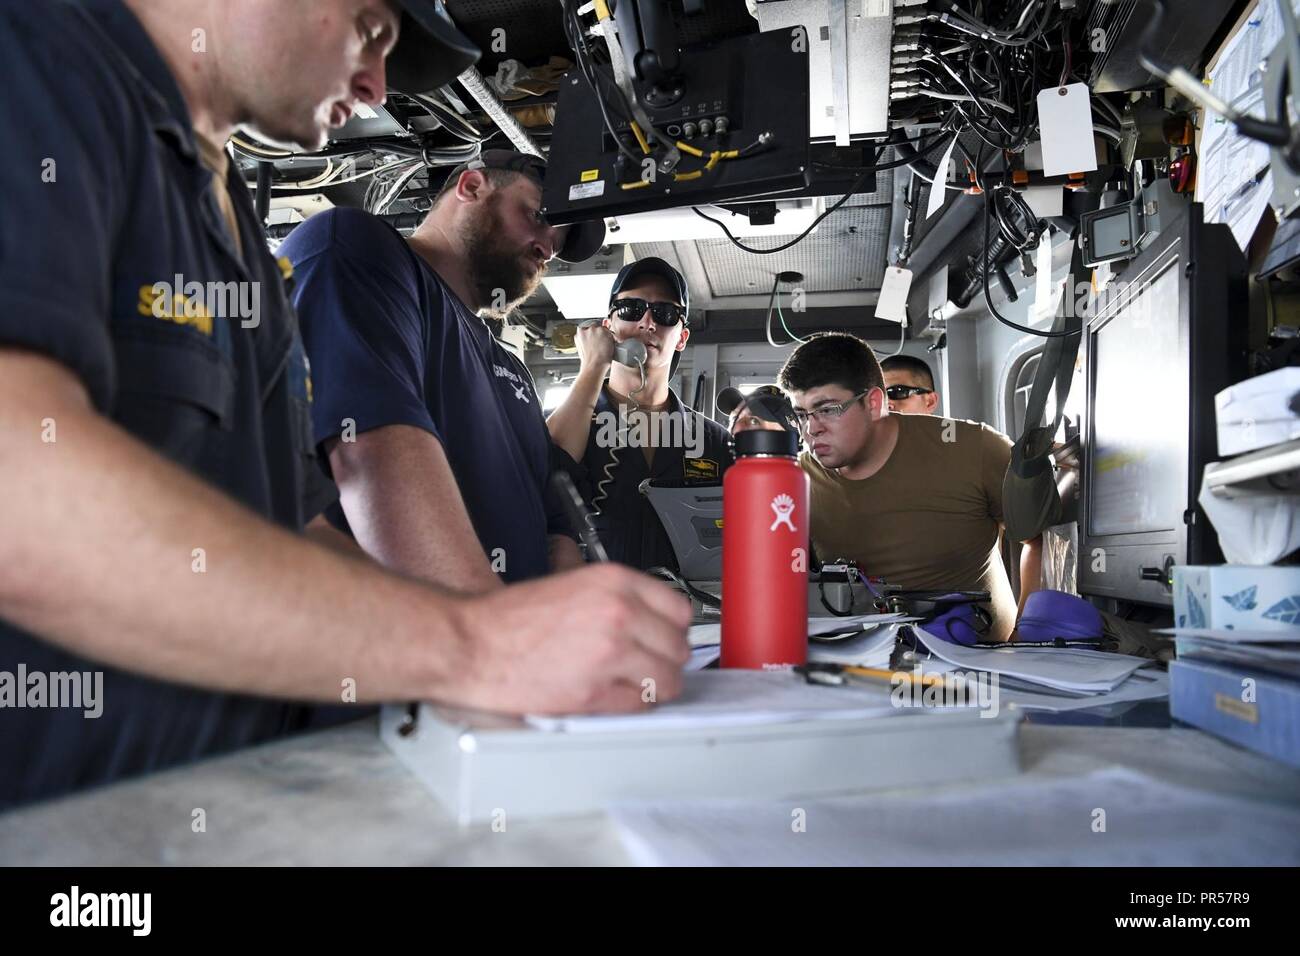 ARABIAN GULF (Sept. 16, 2018) Sailors receive training on the bridge of coastal patrol ship USS Thunderbolt (PC 12) prior to a MK-60 Griffin guided missile system shoot. Ships attached to U.S. 5th Fleet's Task Force 55 are conducting Griffin surface-to-surface missile and naval gun exercises against high speed maneuvering targets to advance their ability to defend minesweepers and other coastal patrol ships. U.S. 5th Fleet and coalition assets are participating in numerous exercises as part of the greater Theater Counter Mine and Maritime Security Exercise to ensure maritime stability and secu Stock Photo